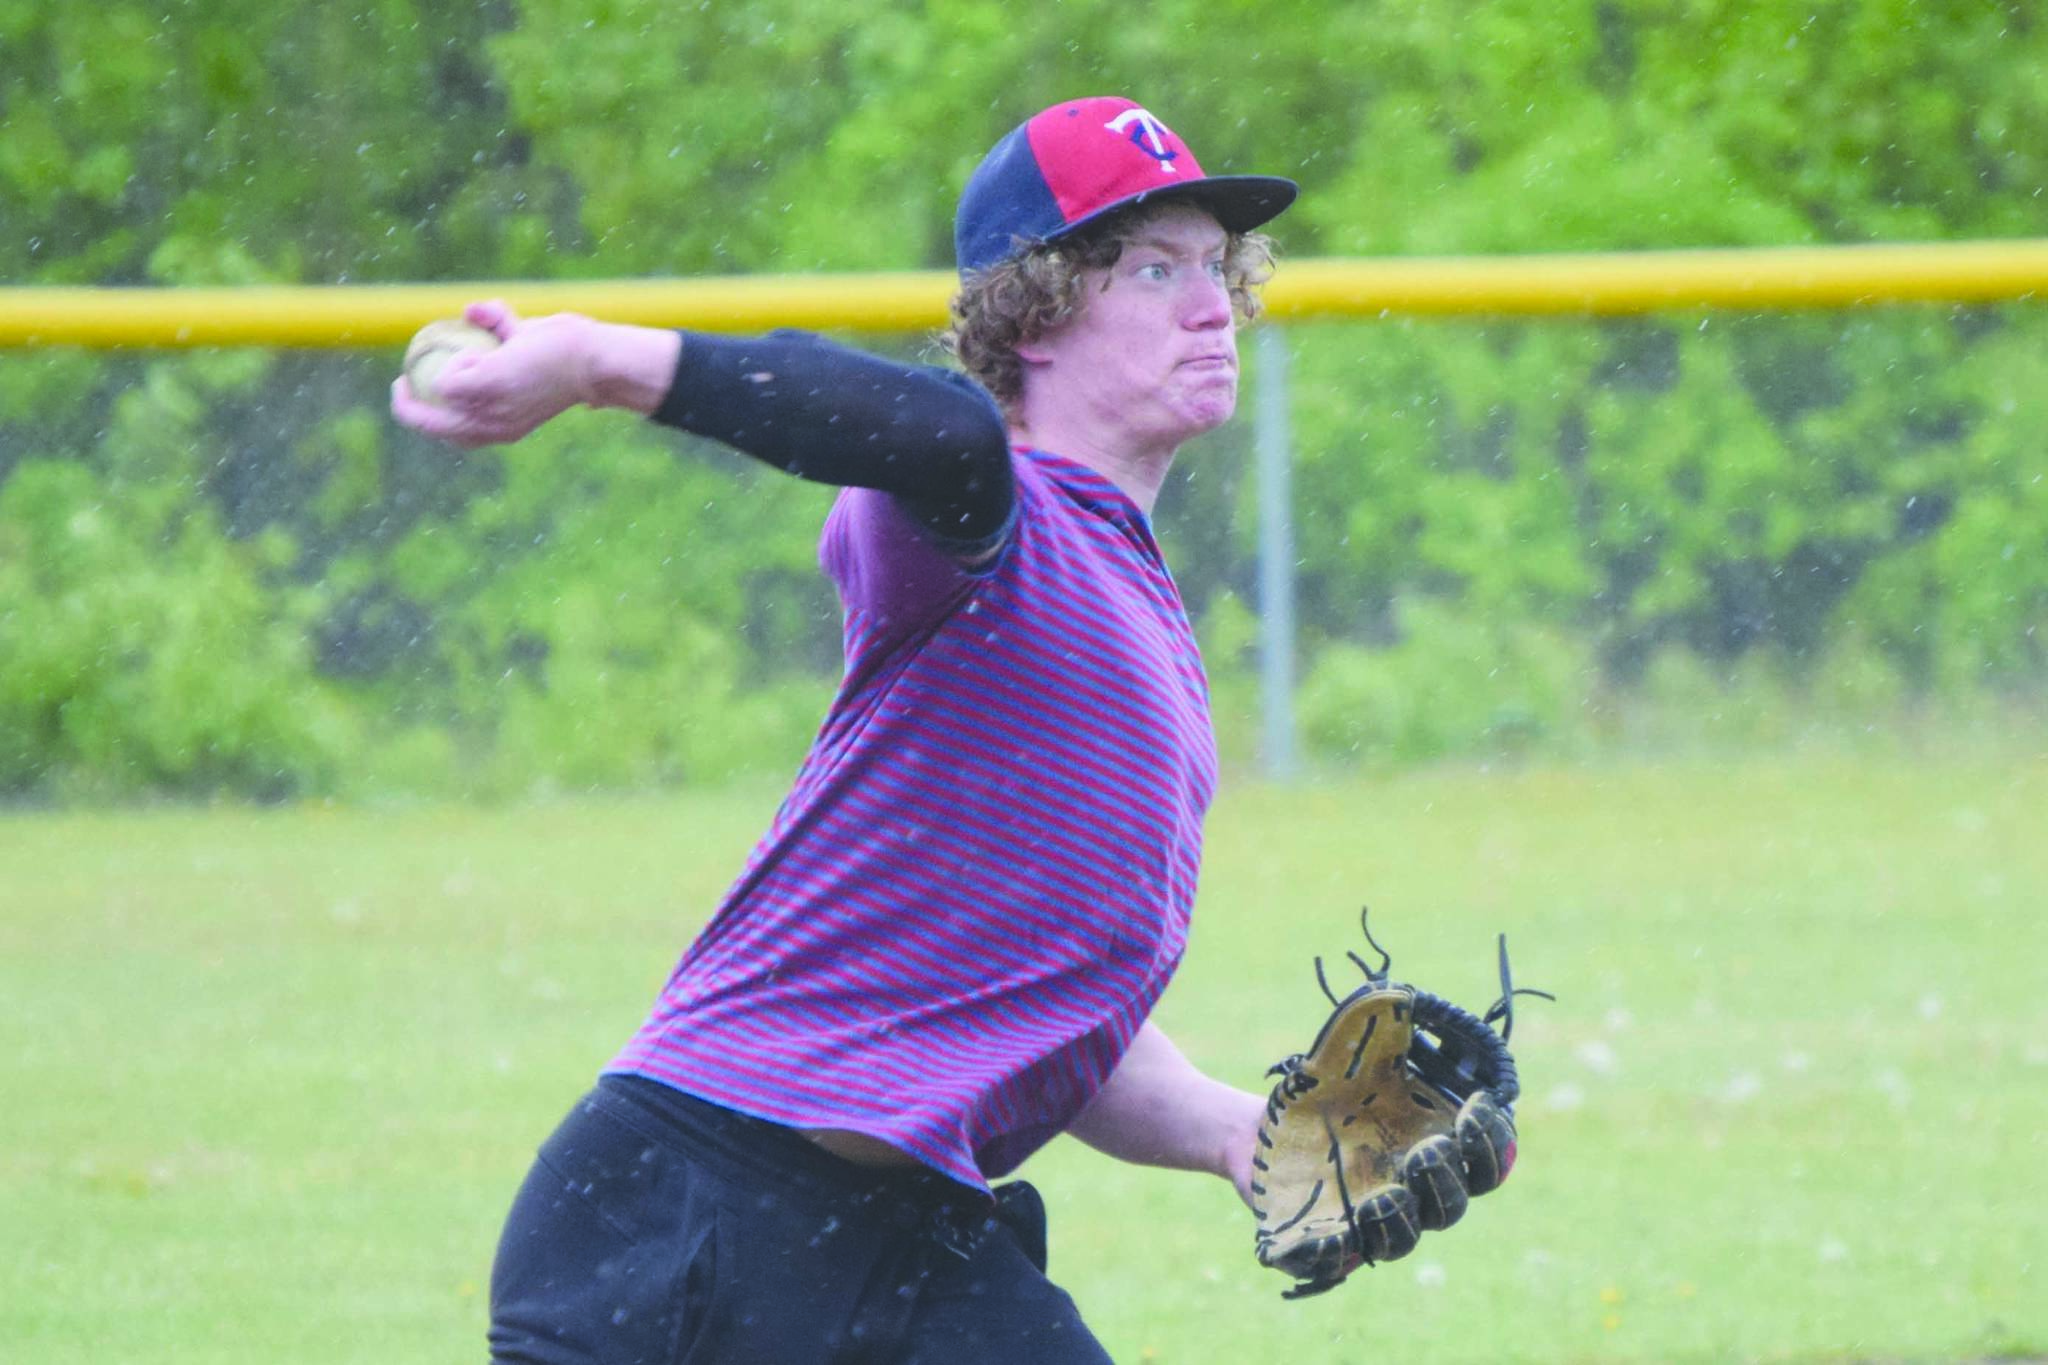 Alaska 20 shortstop Mose Hayes throws to first base during practice Monday, June 8, 2020, at the Soldotna baseball fields in Soldotna, Alaska. (Photo by Jeff Helminiak/Peninsula Clarion)